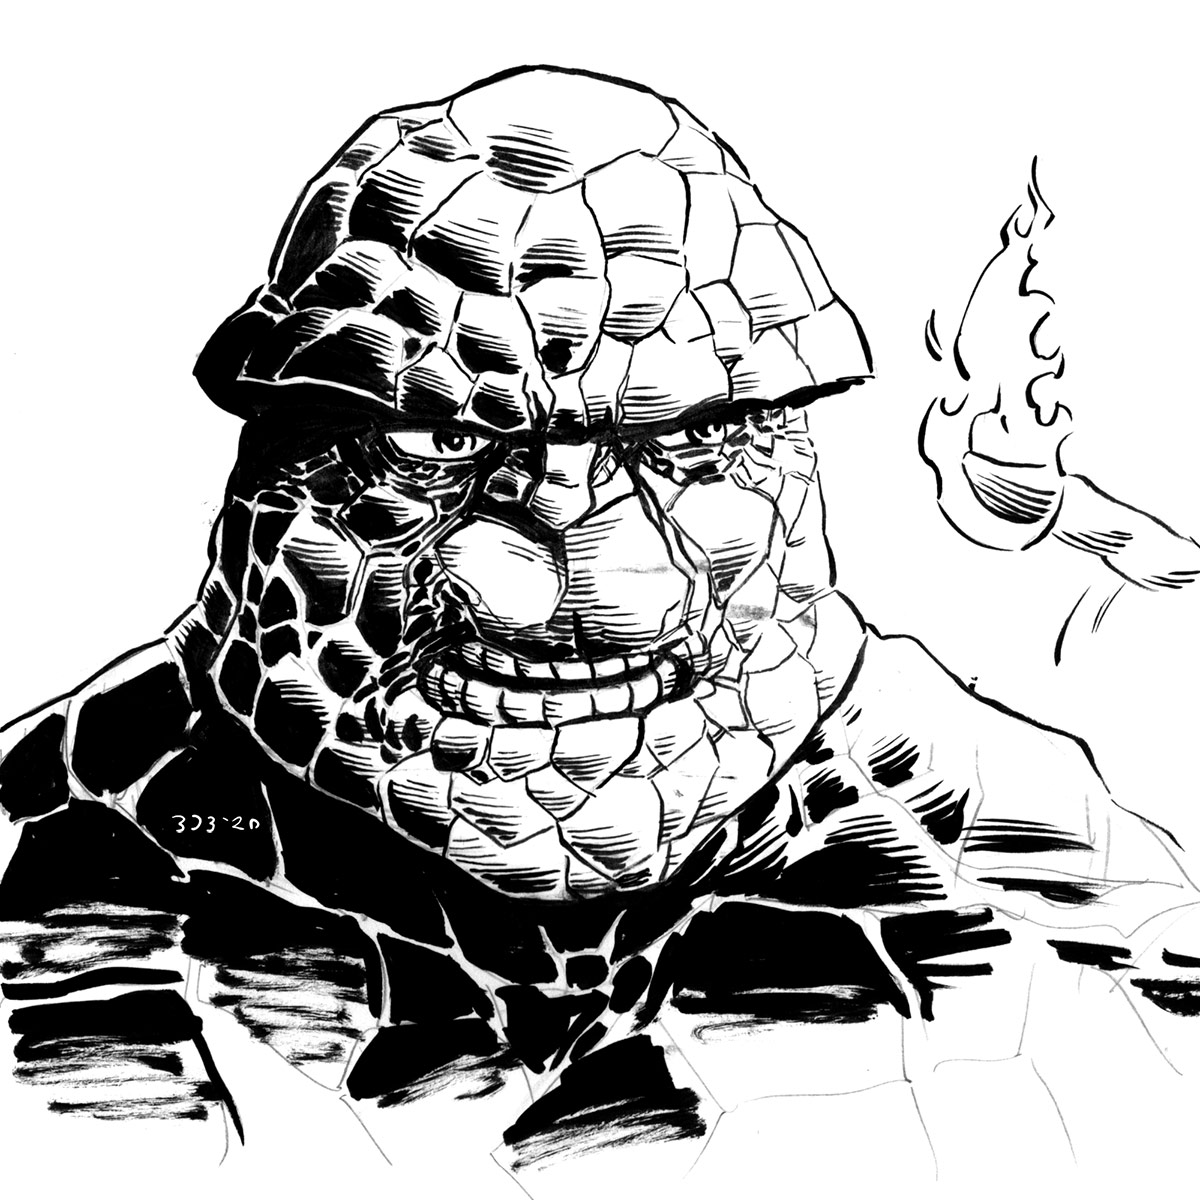 #monstersketchmonday Maybe migraine onset not the BEST time to bust out the ink and brush again, but ah well. Monday waits for no one. #fantasticfour #theeverlovinblueeyedthing #comicart #ink #brushinking #migraineart #isitlopsidedorisitjustme